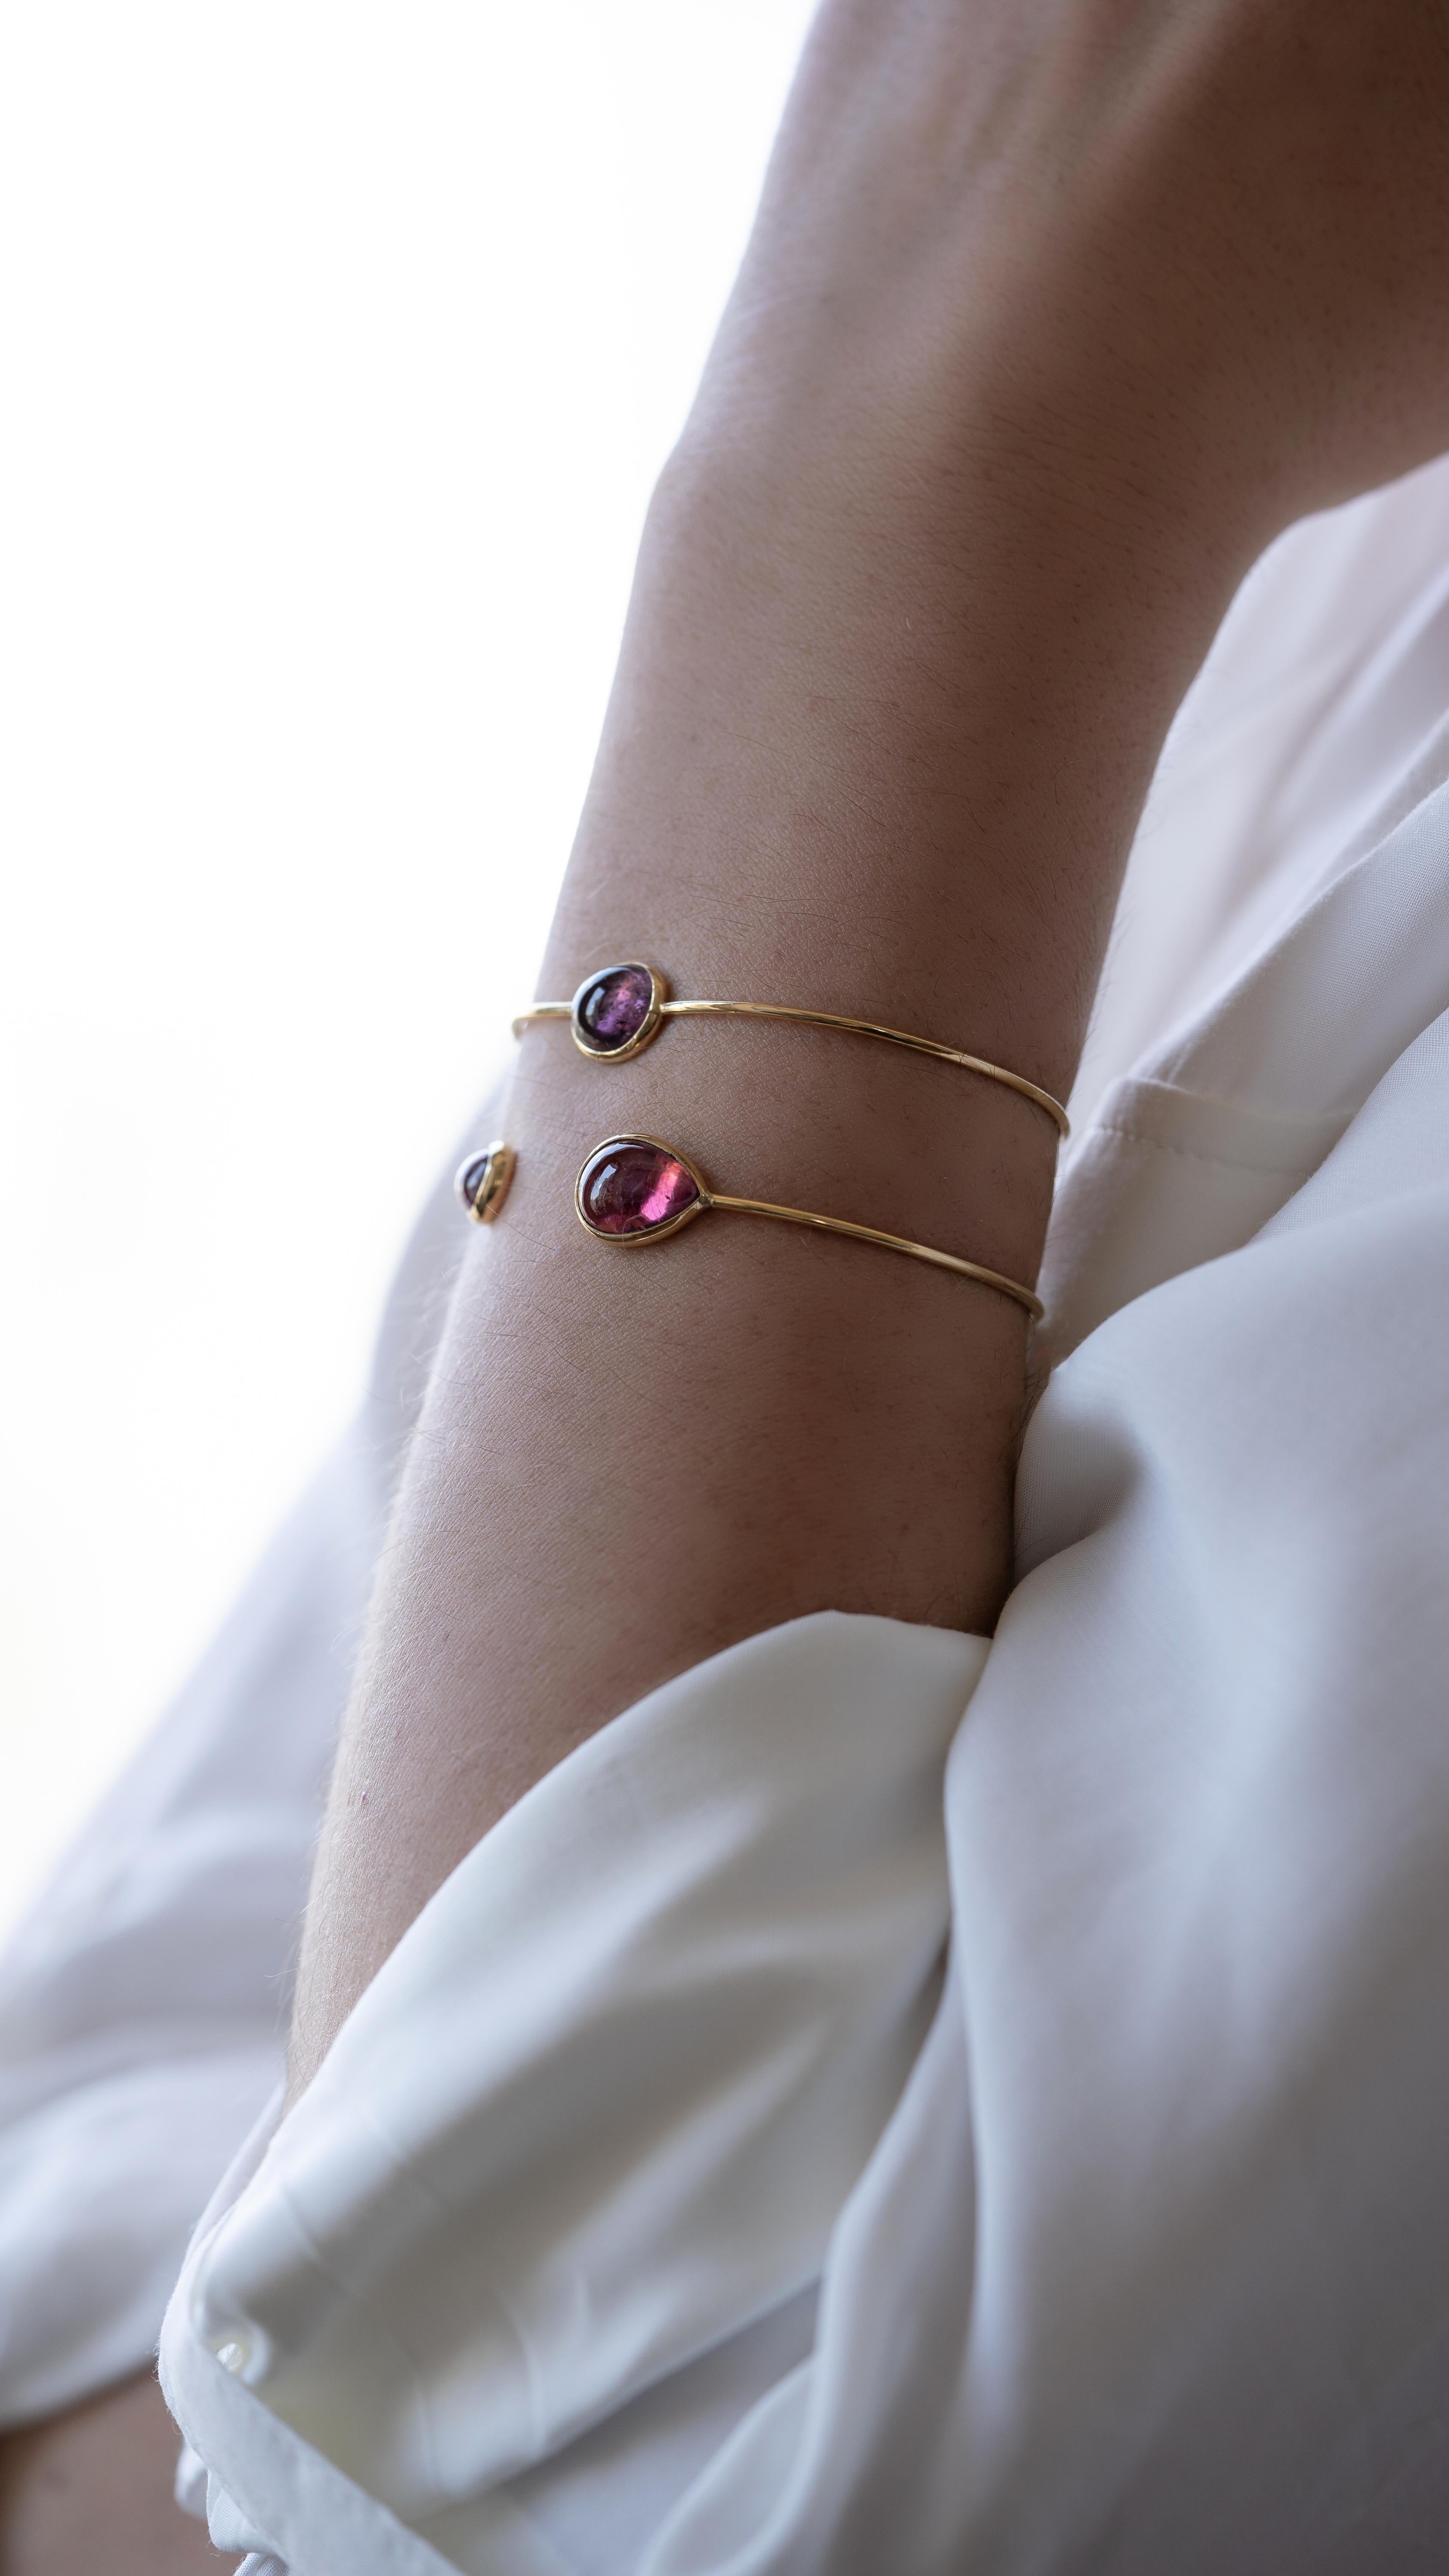 One 18k gold bangle set with pink tourmaline pears cabochons.
Weight: 8.03 carats, 5.73 grams.
French assay mark.
Price without local taxes.